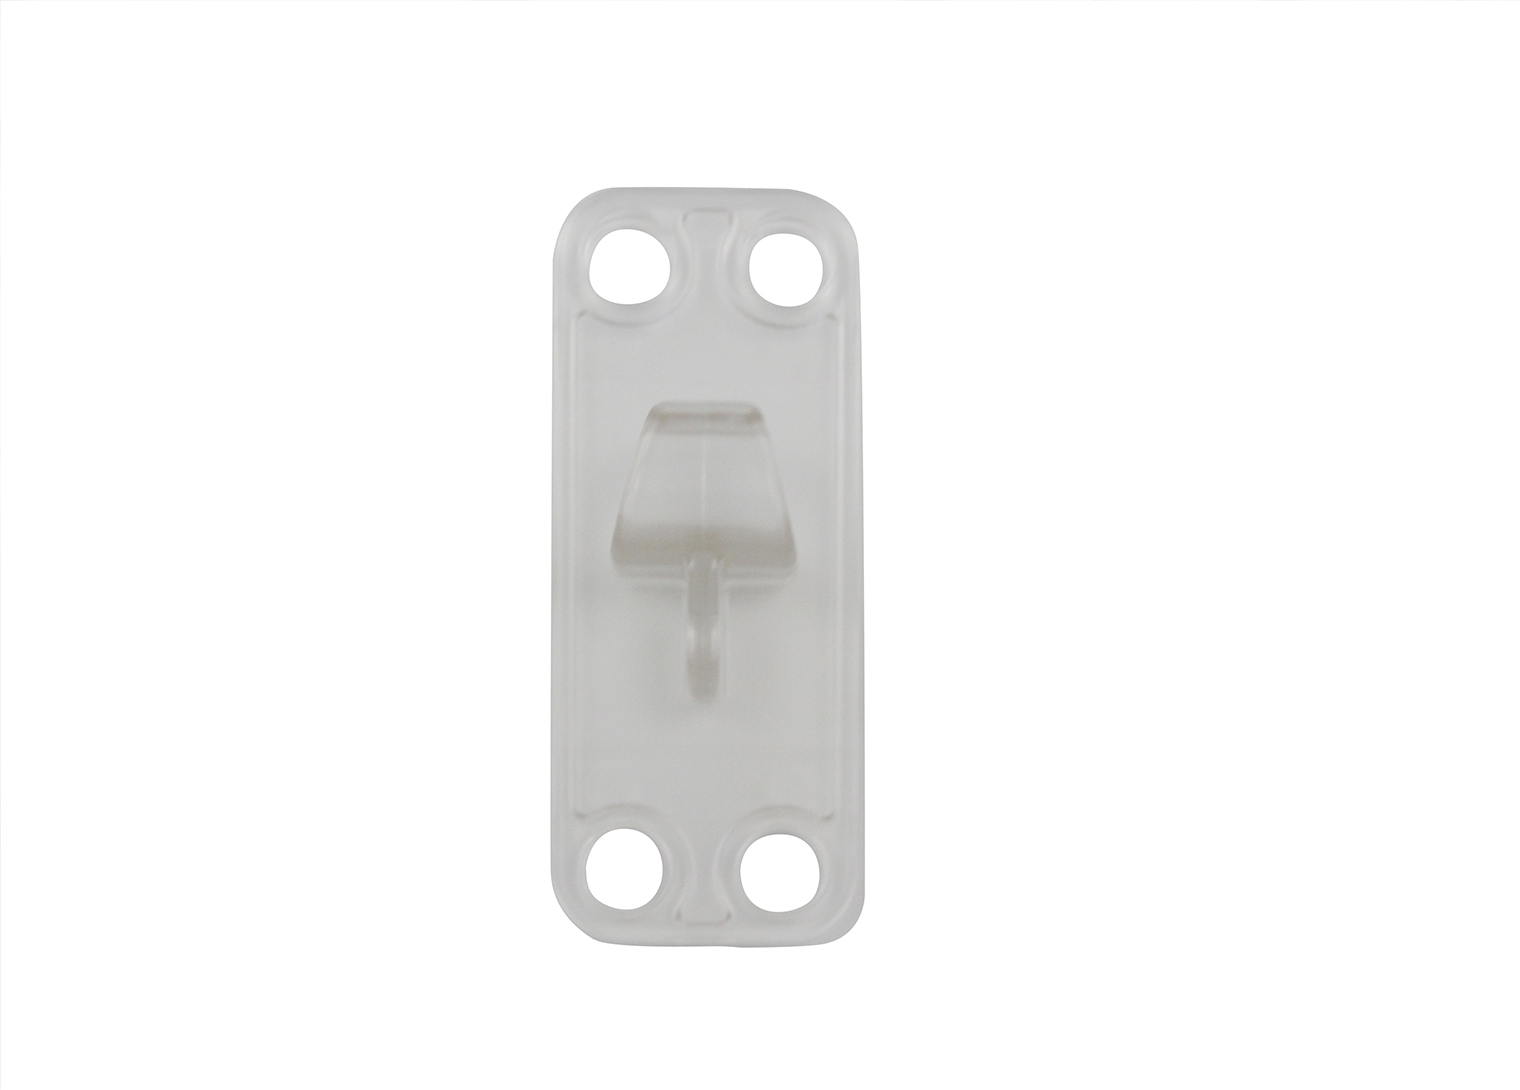 6 Piece Transparent Wall Hook (Holds up to 15 kgs)